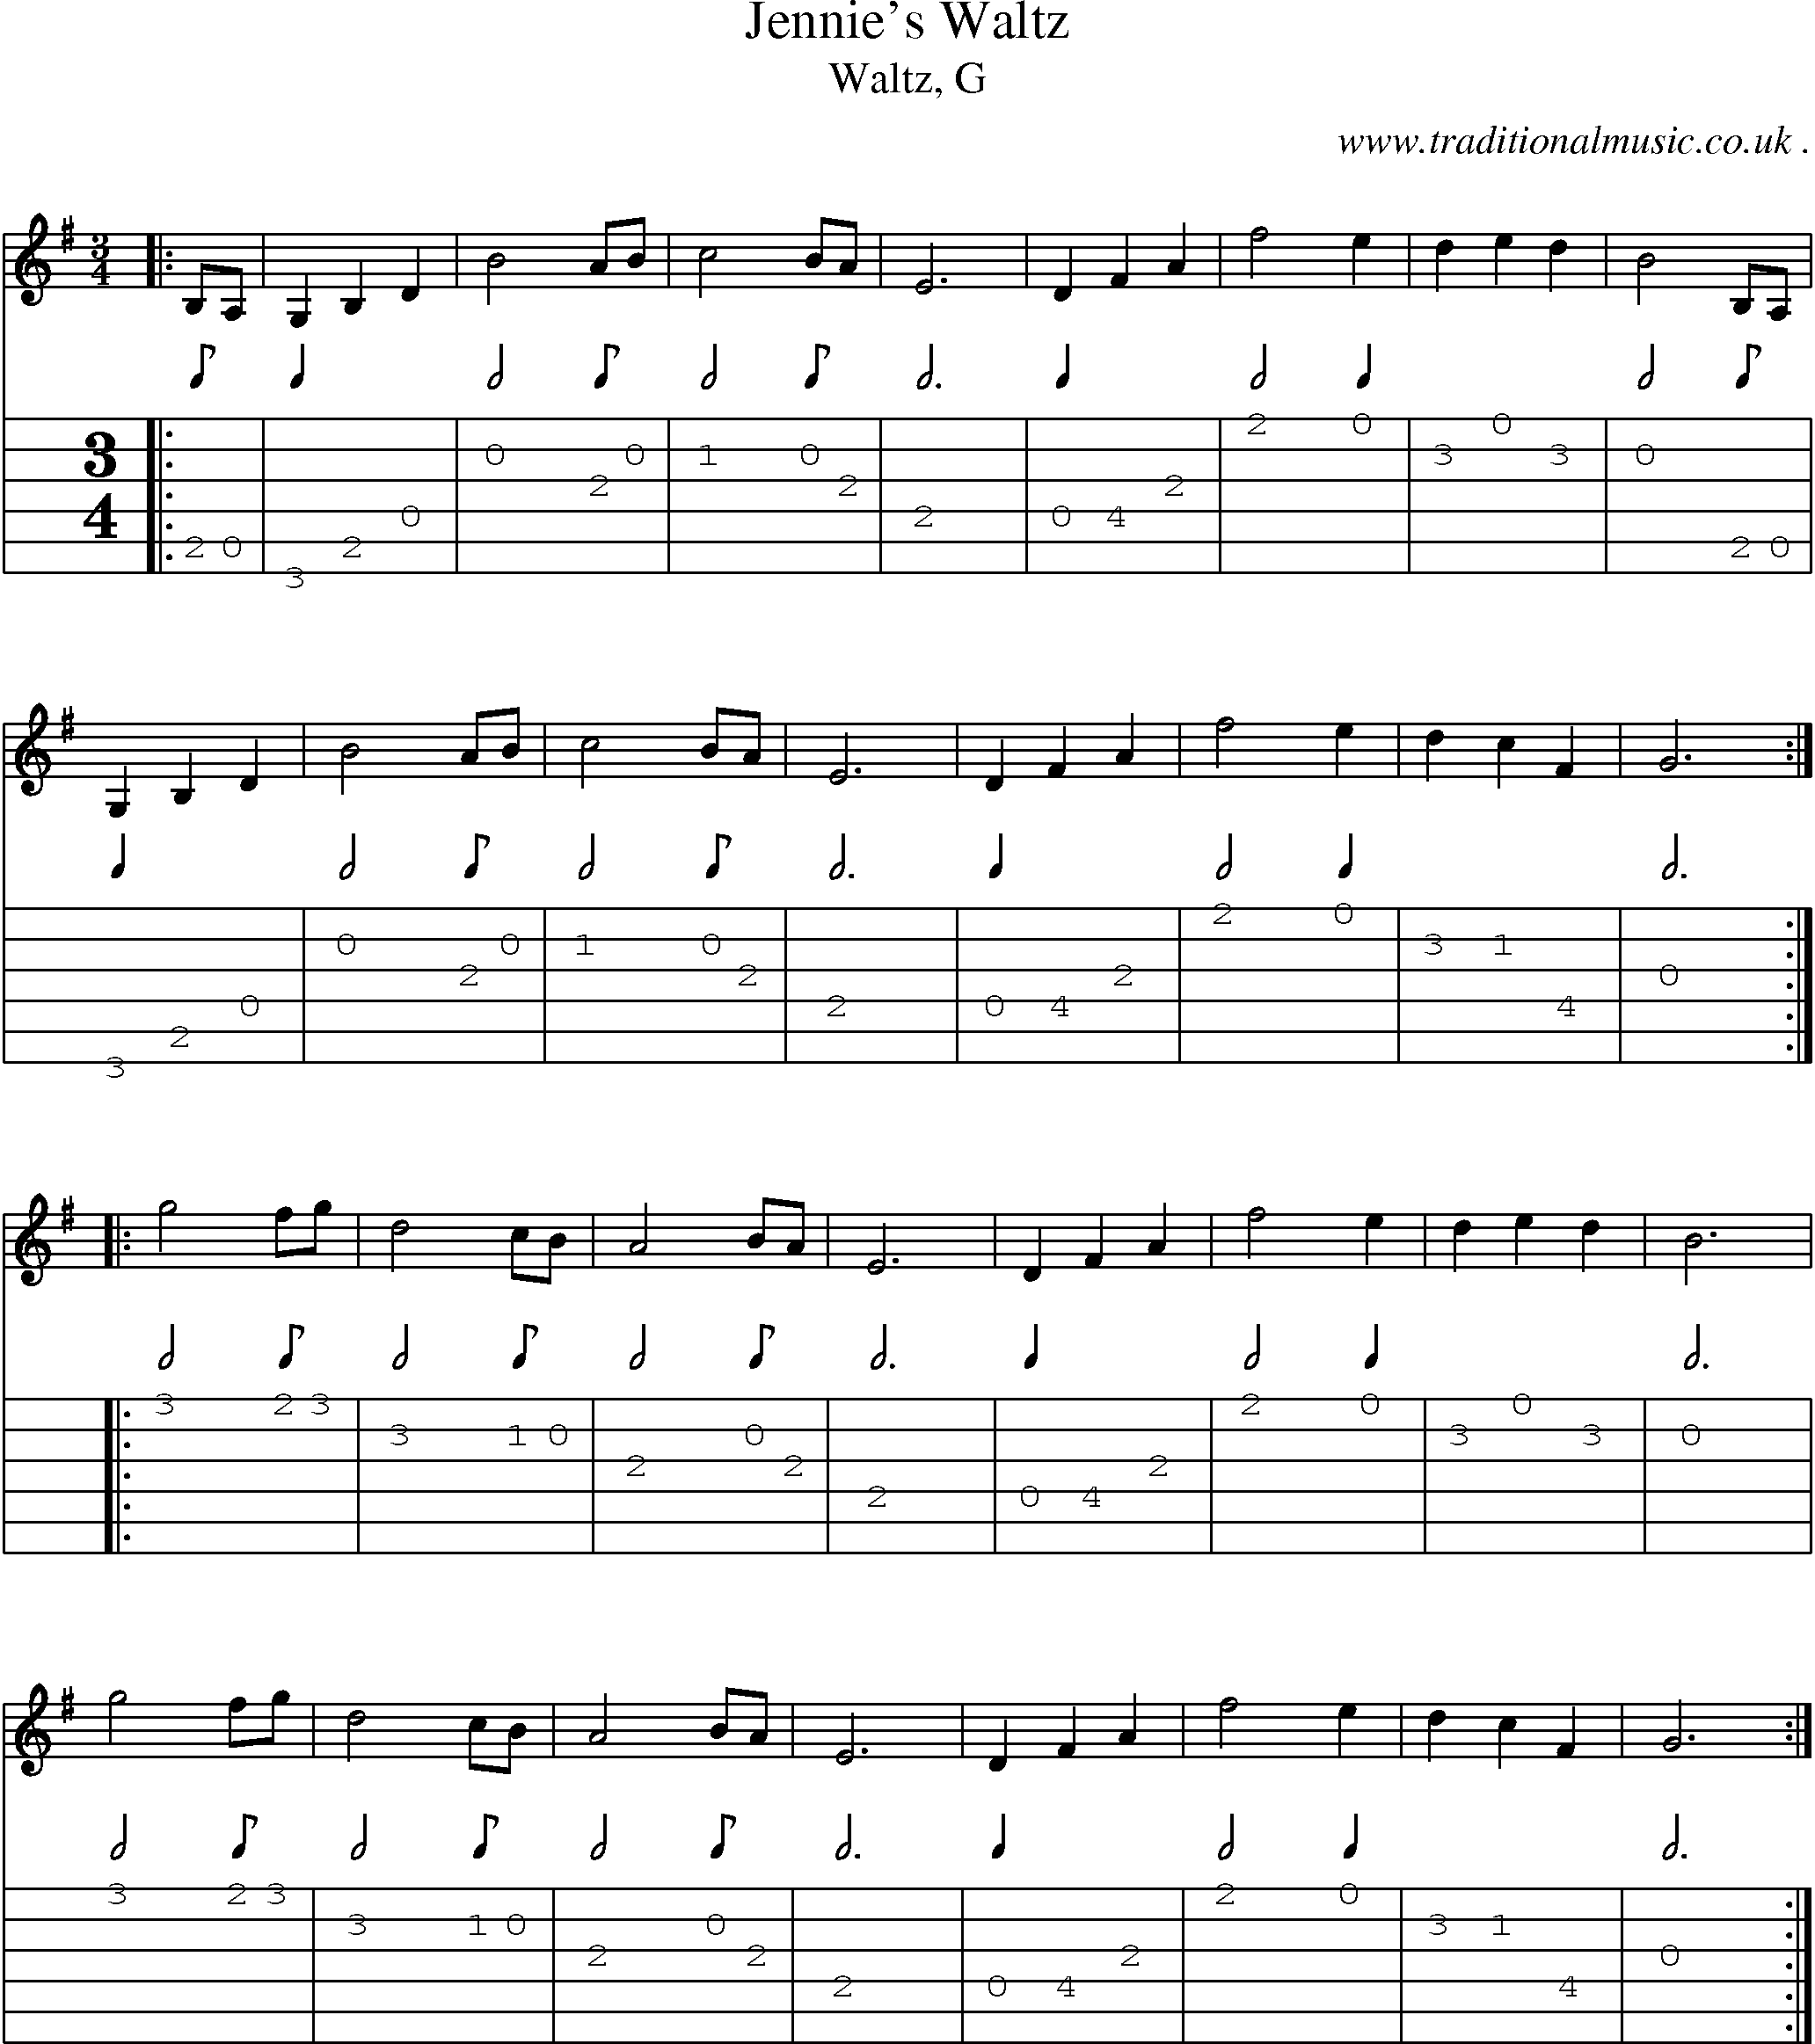 Sheet-music  score, Chords and Guitar Tabs for Jennies Waltz